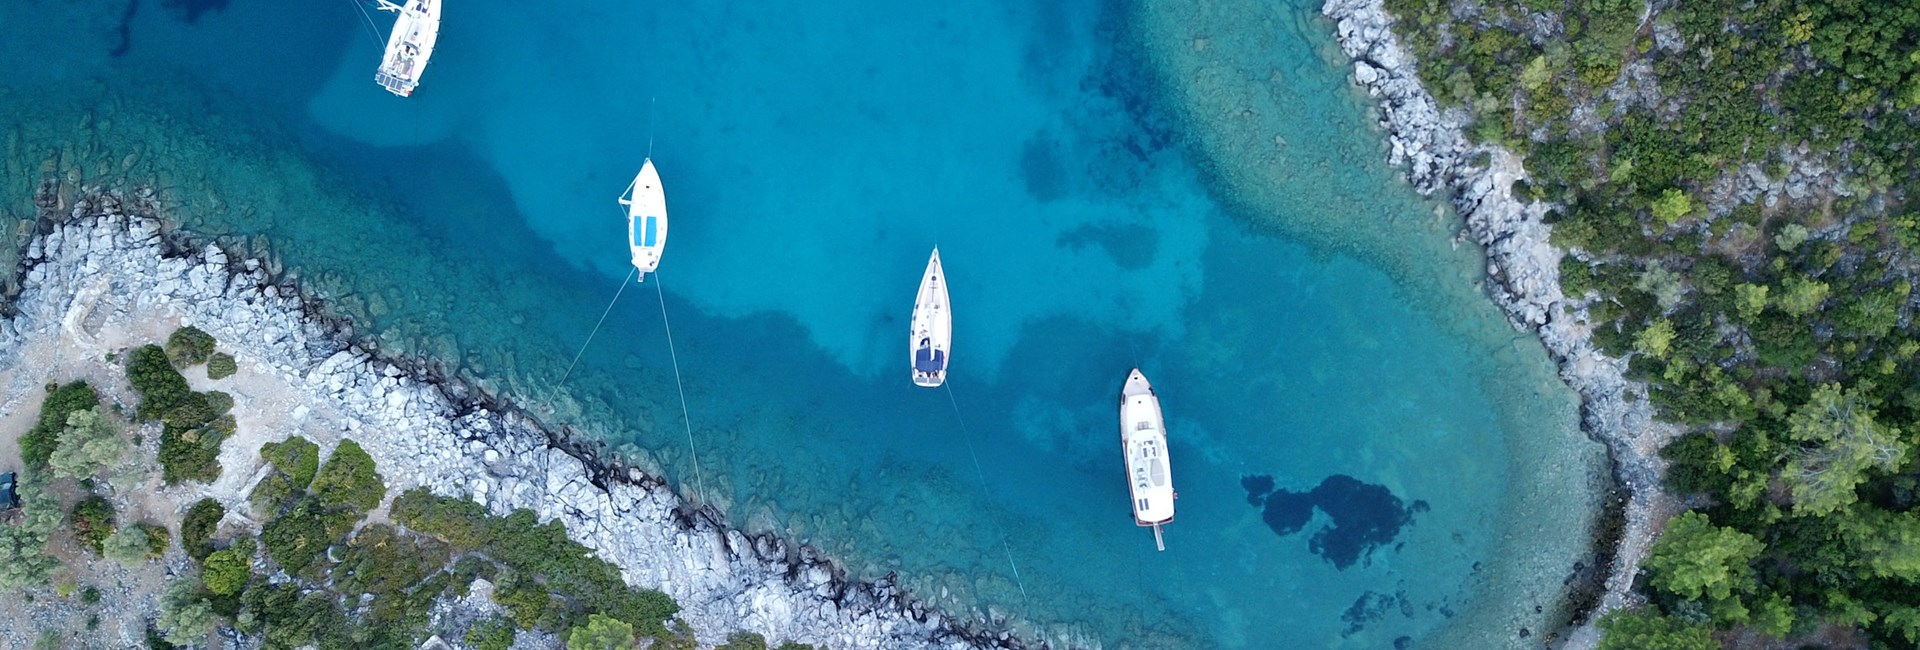 white boats on blue water surrounded by beach